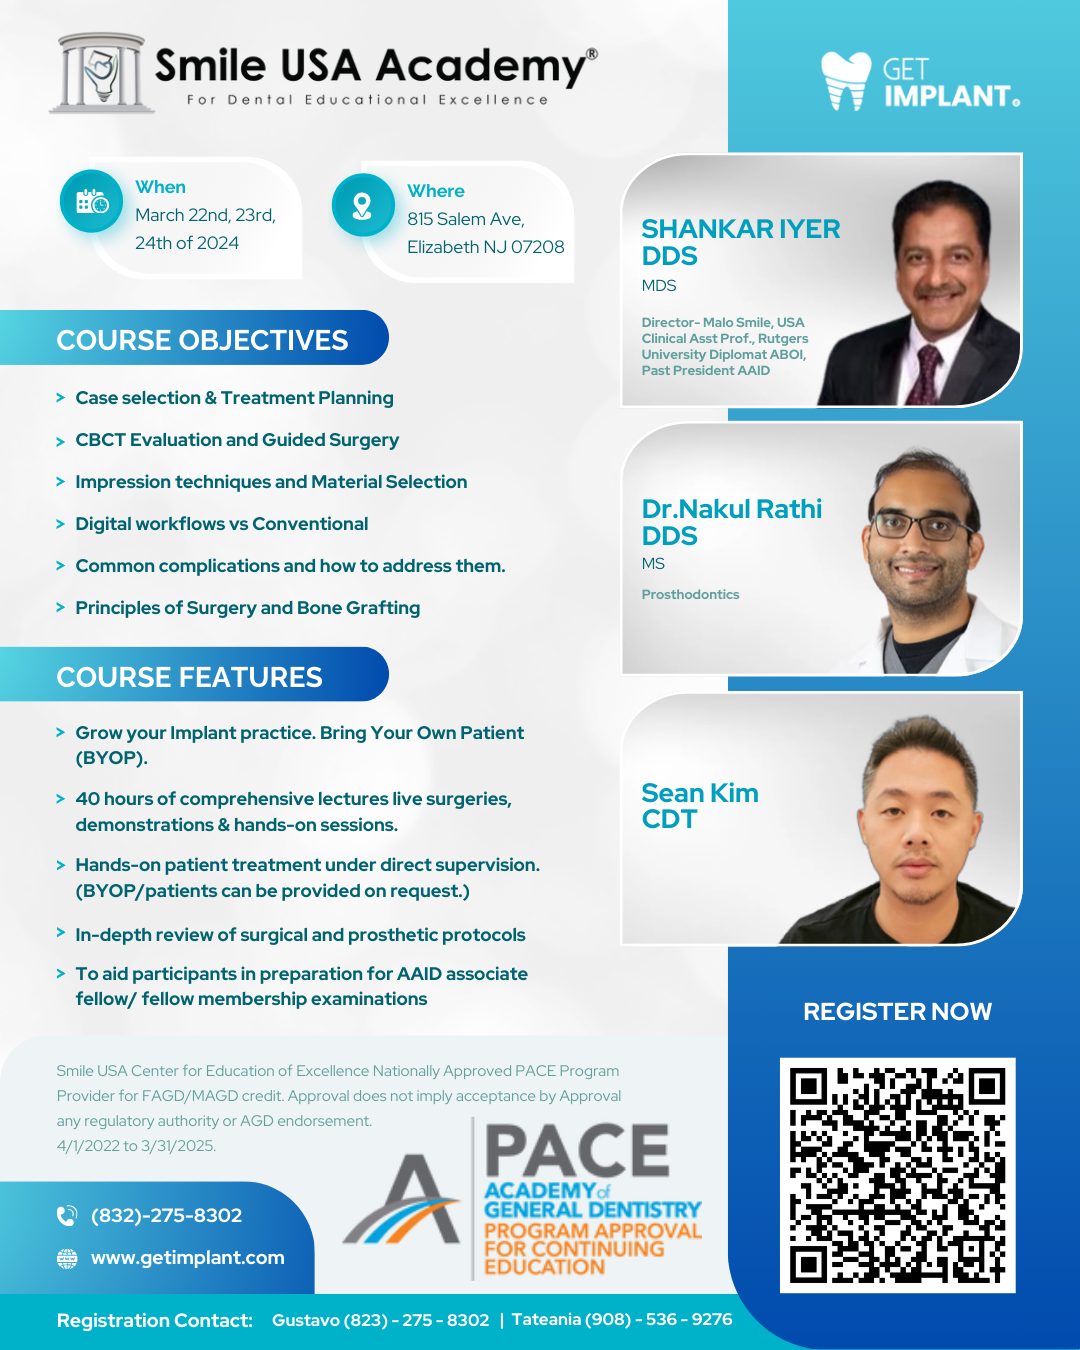 Mainstream Implant Live Surgery Course: Comprehensive Training - New Jersey - September